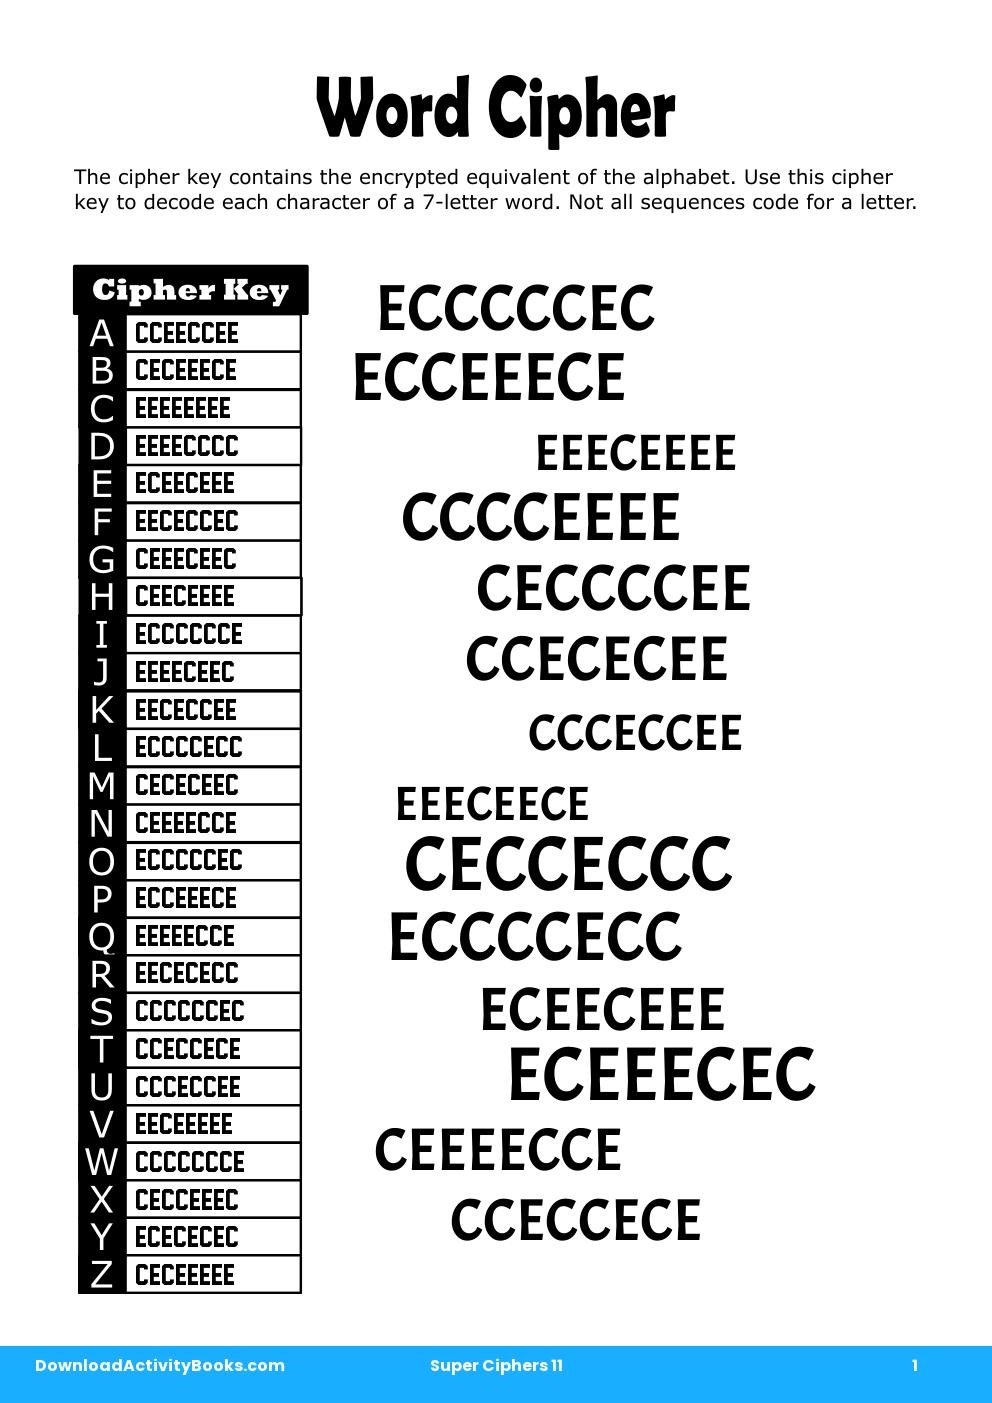 Word Cipher in Super Ciphers 11